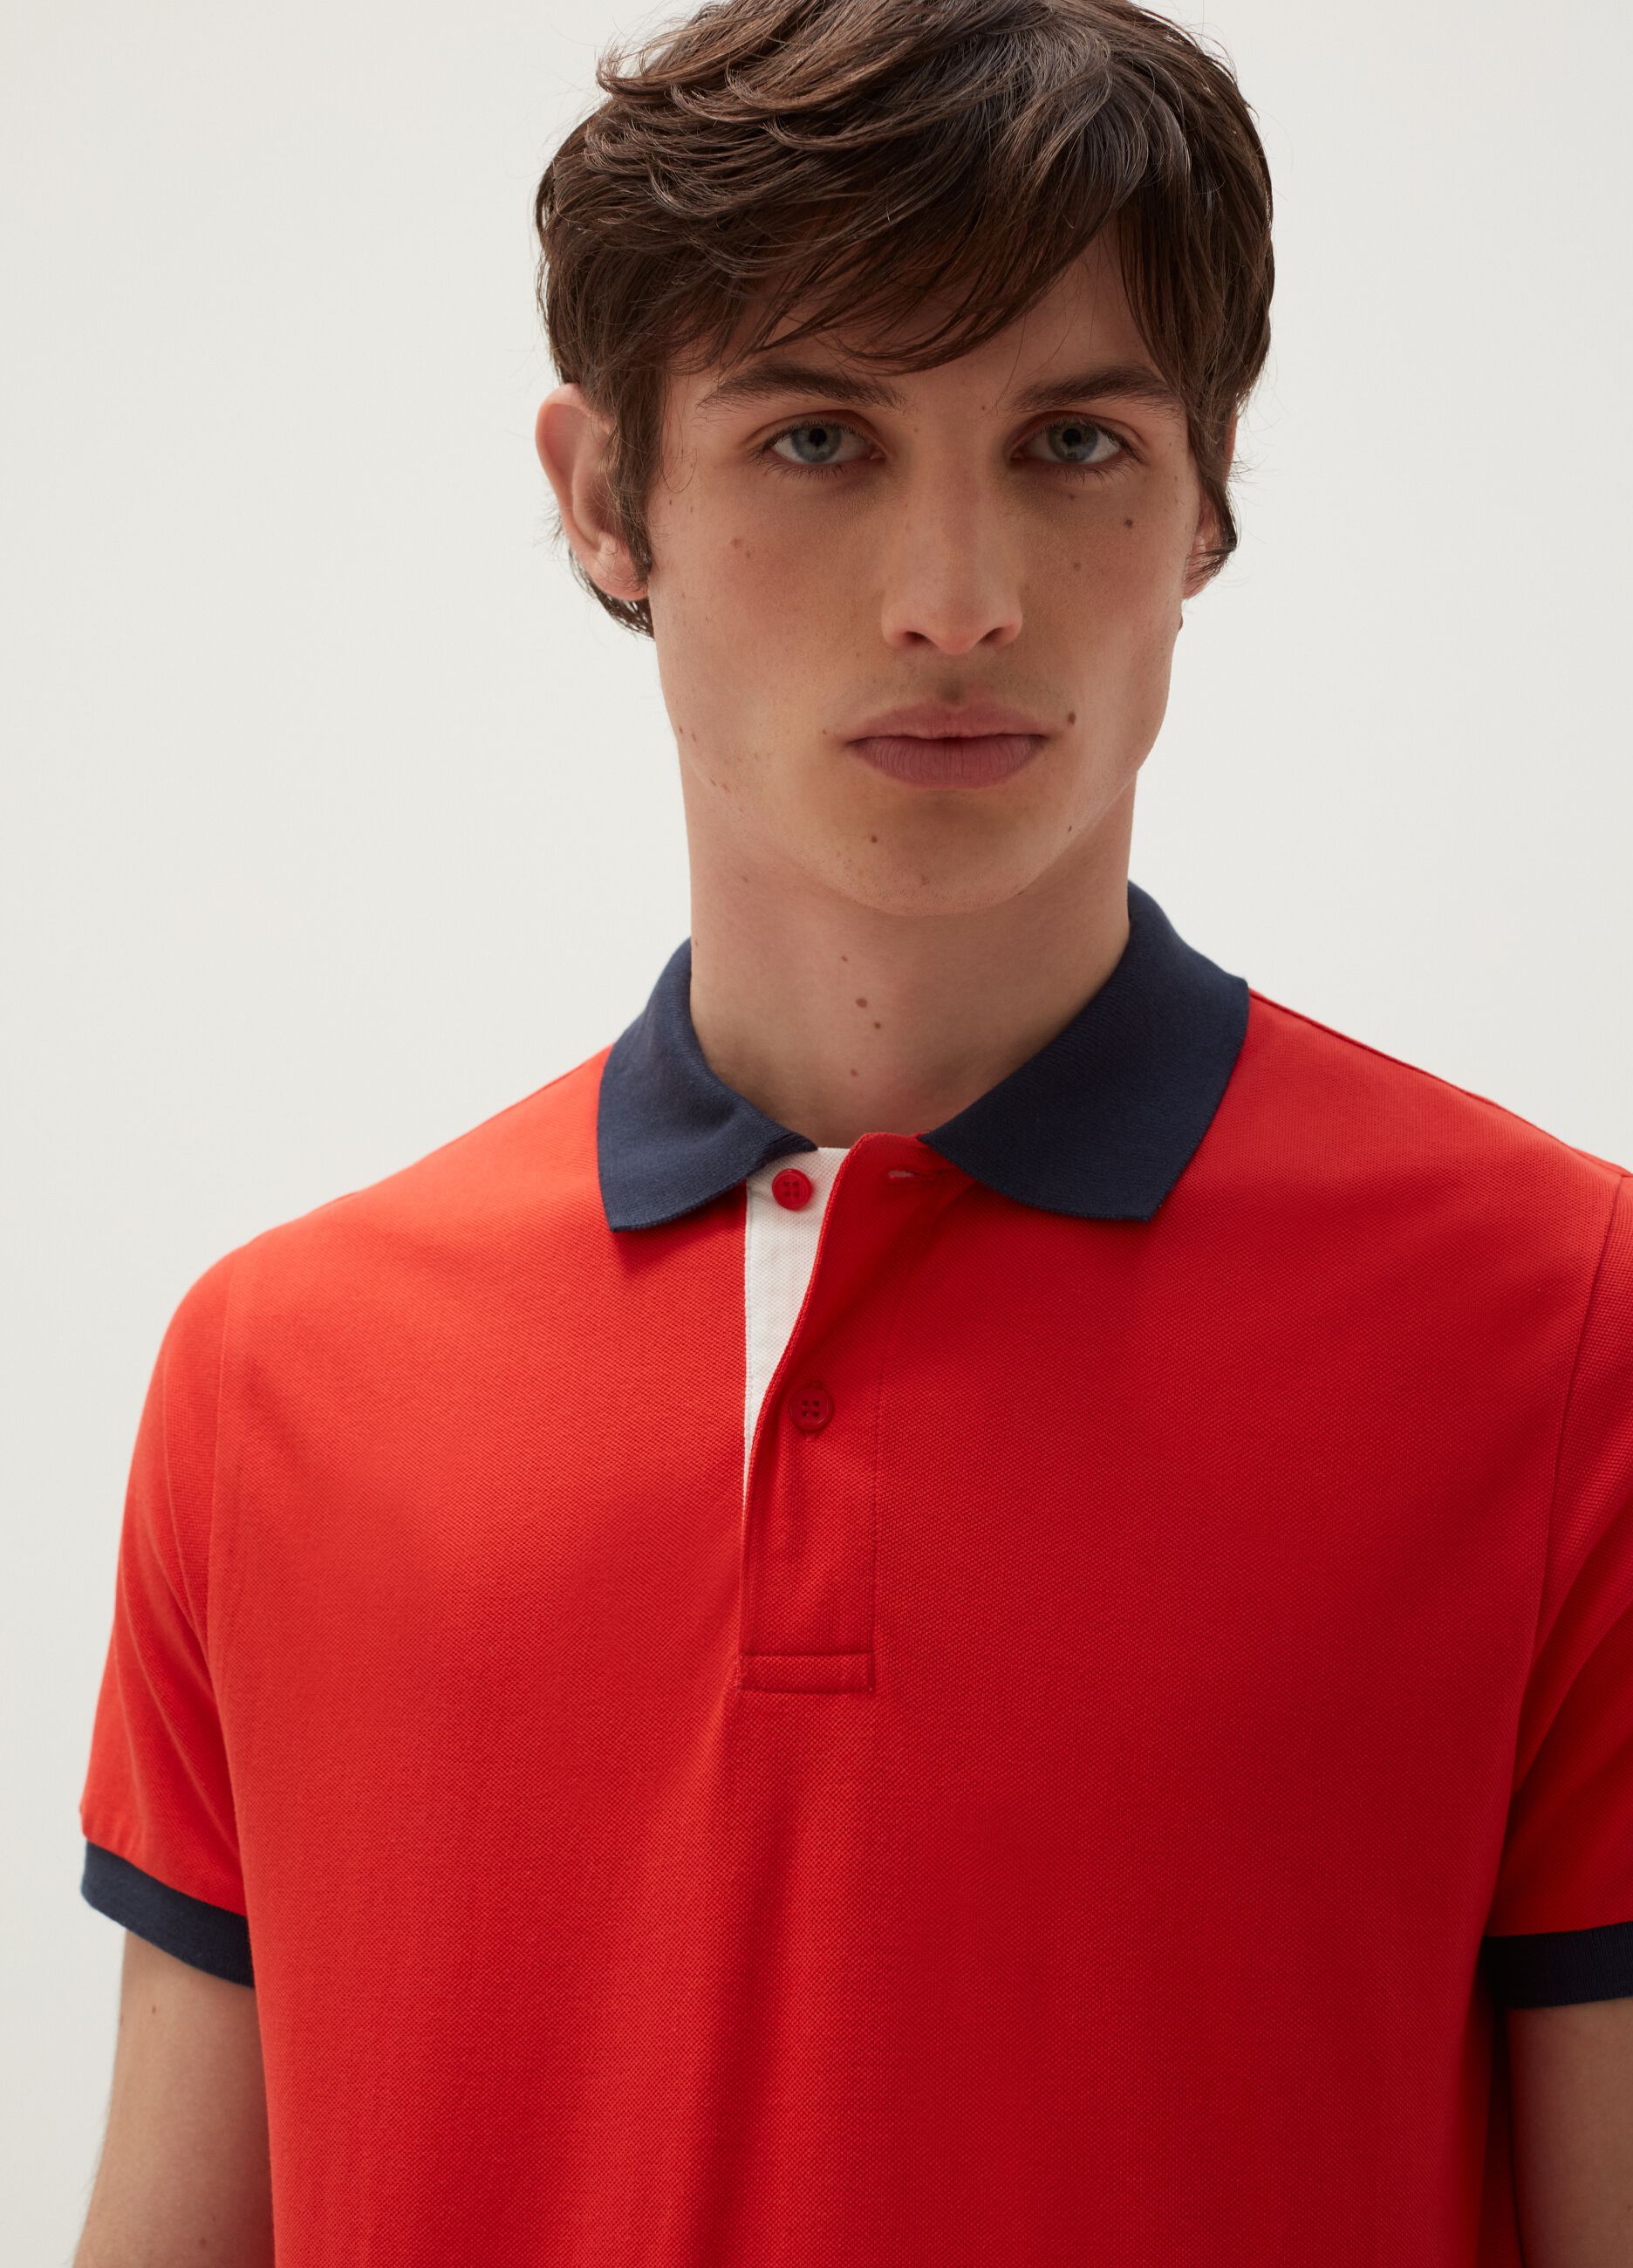 Cotton piquet polo shirt with contrasting details